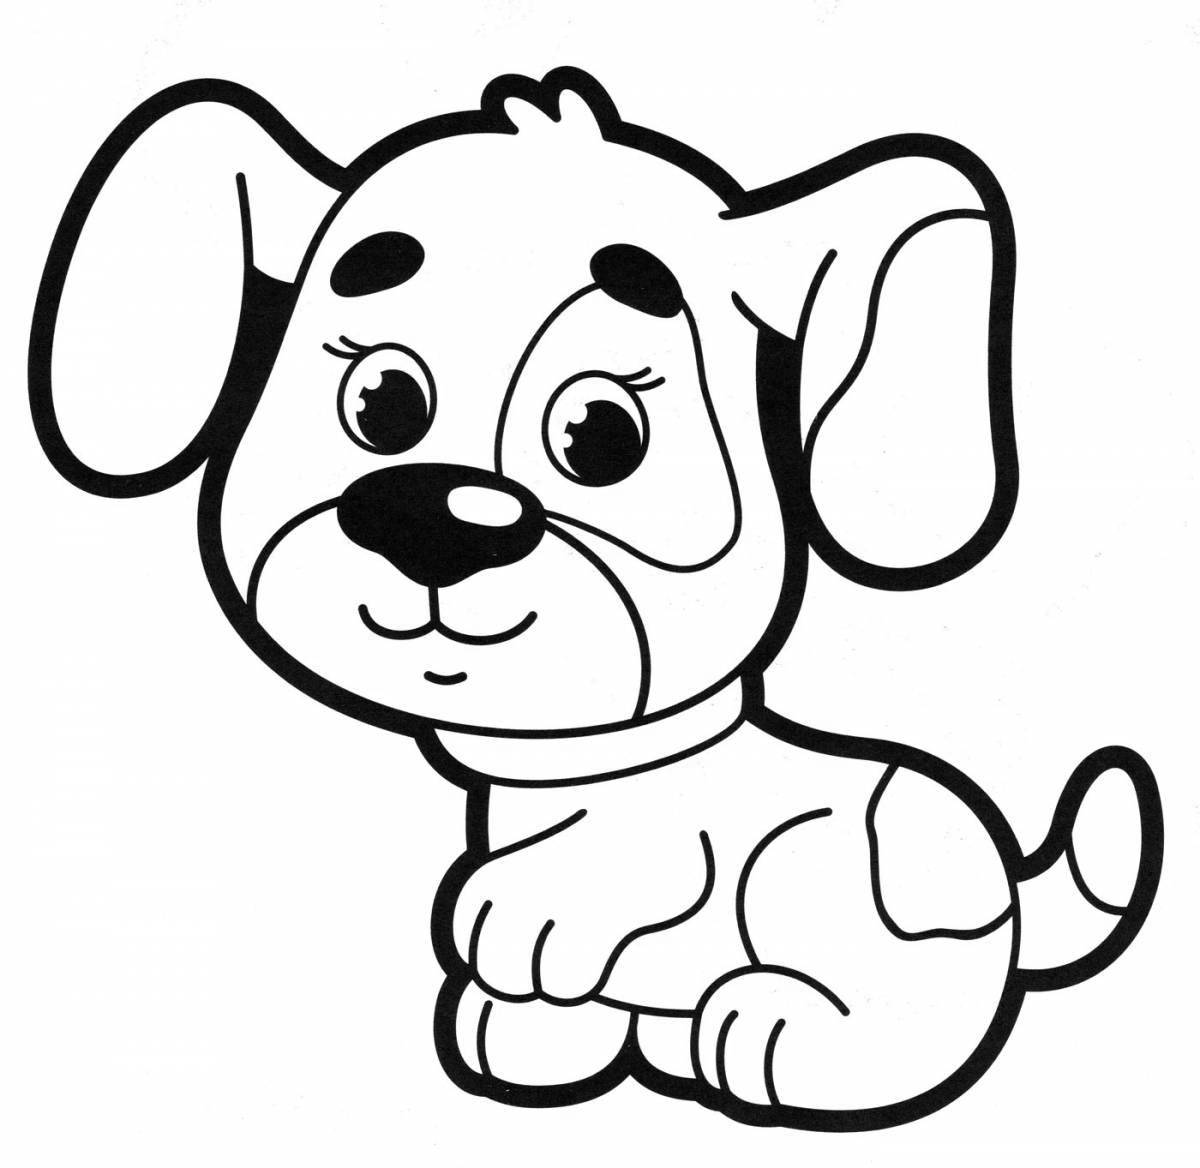 Coloring page loving dog